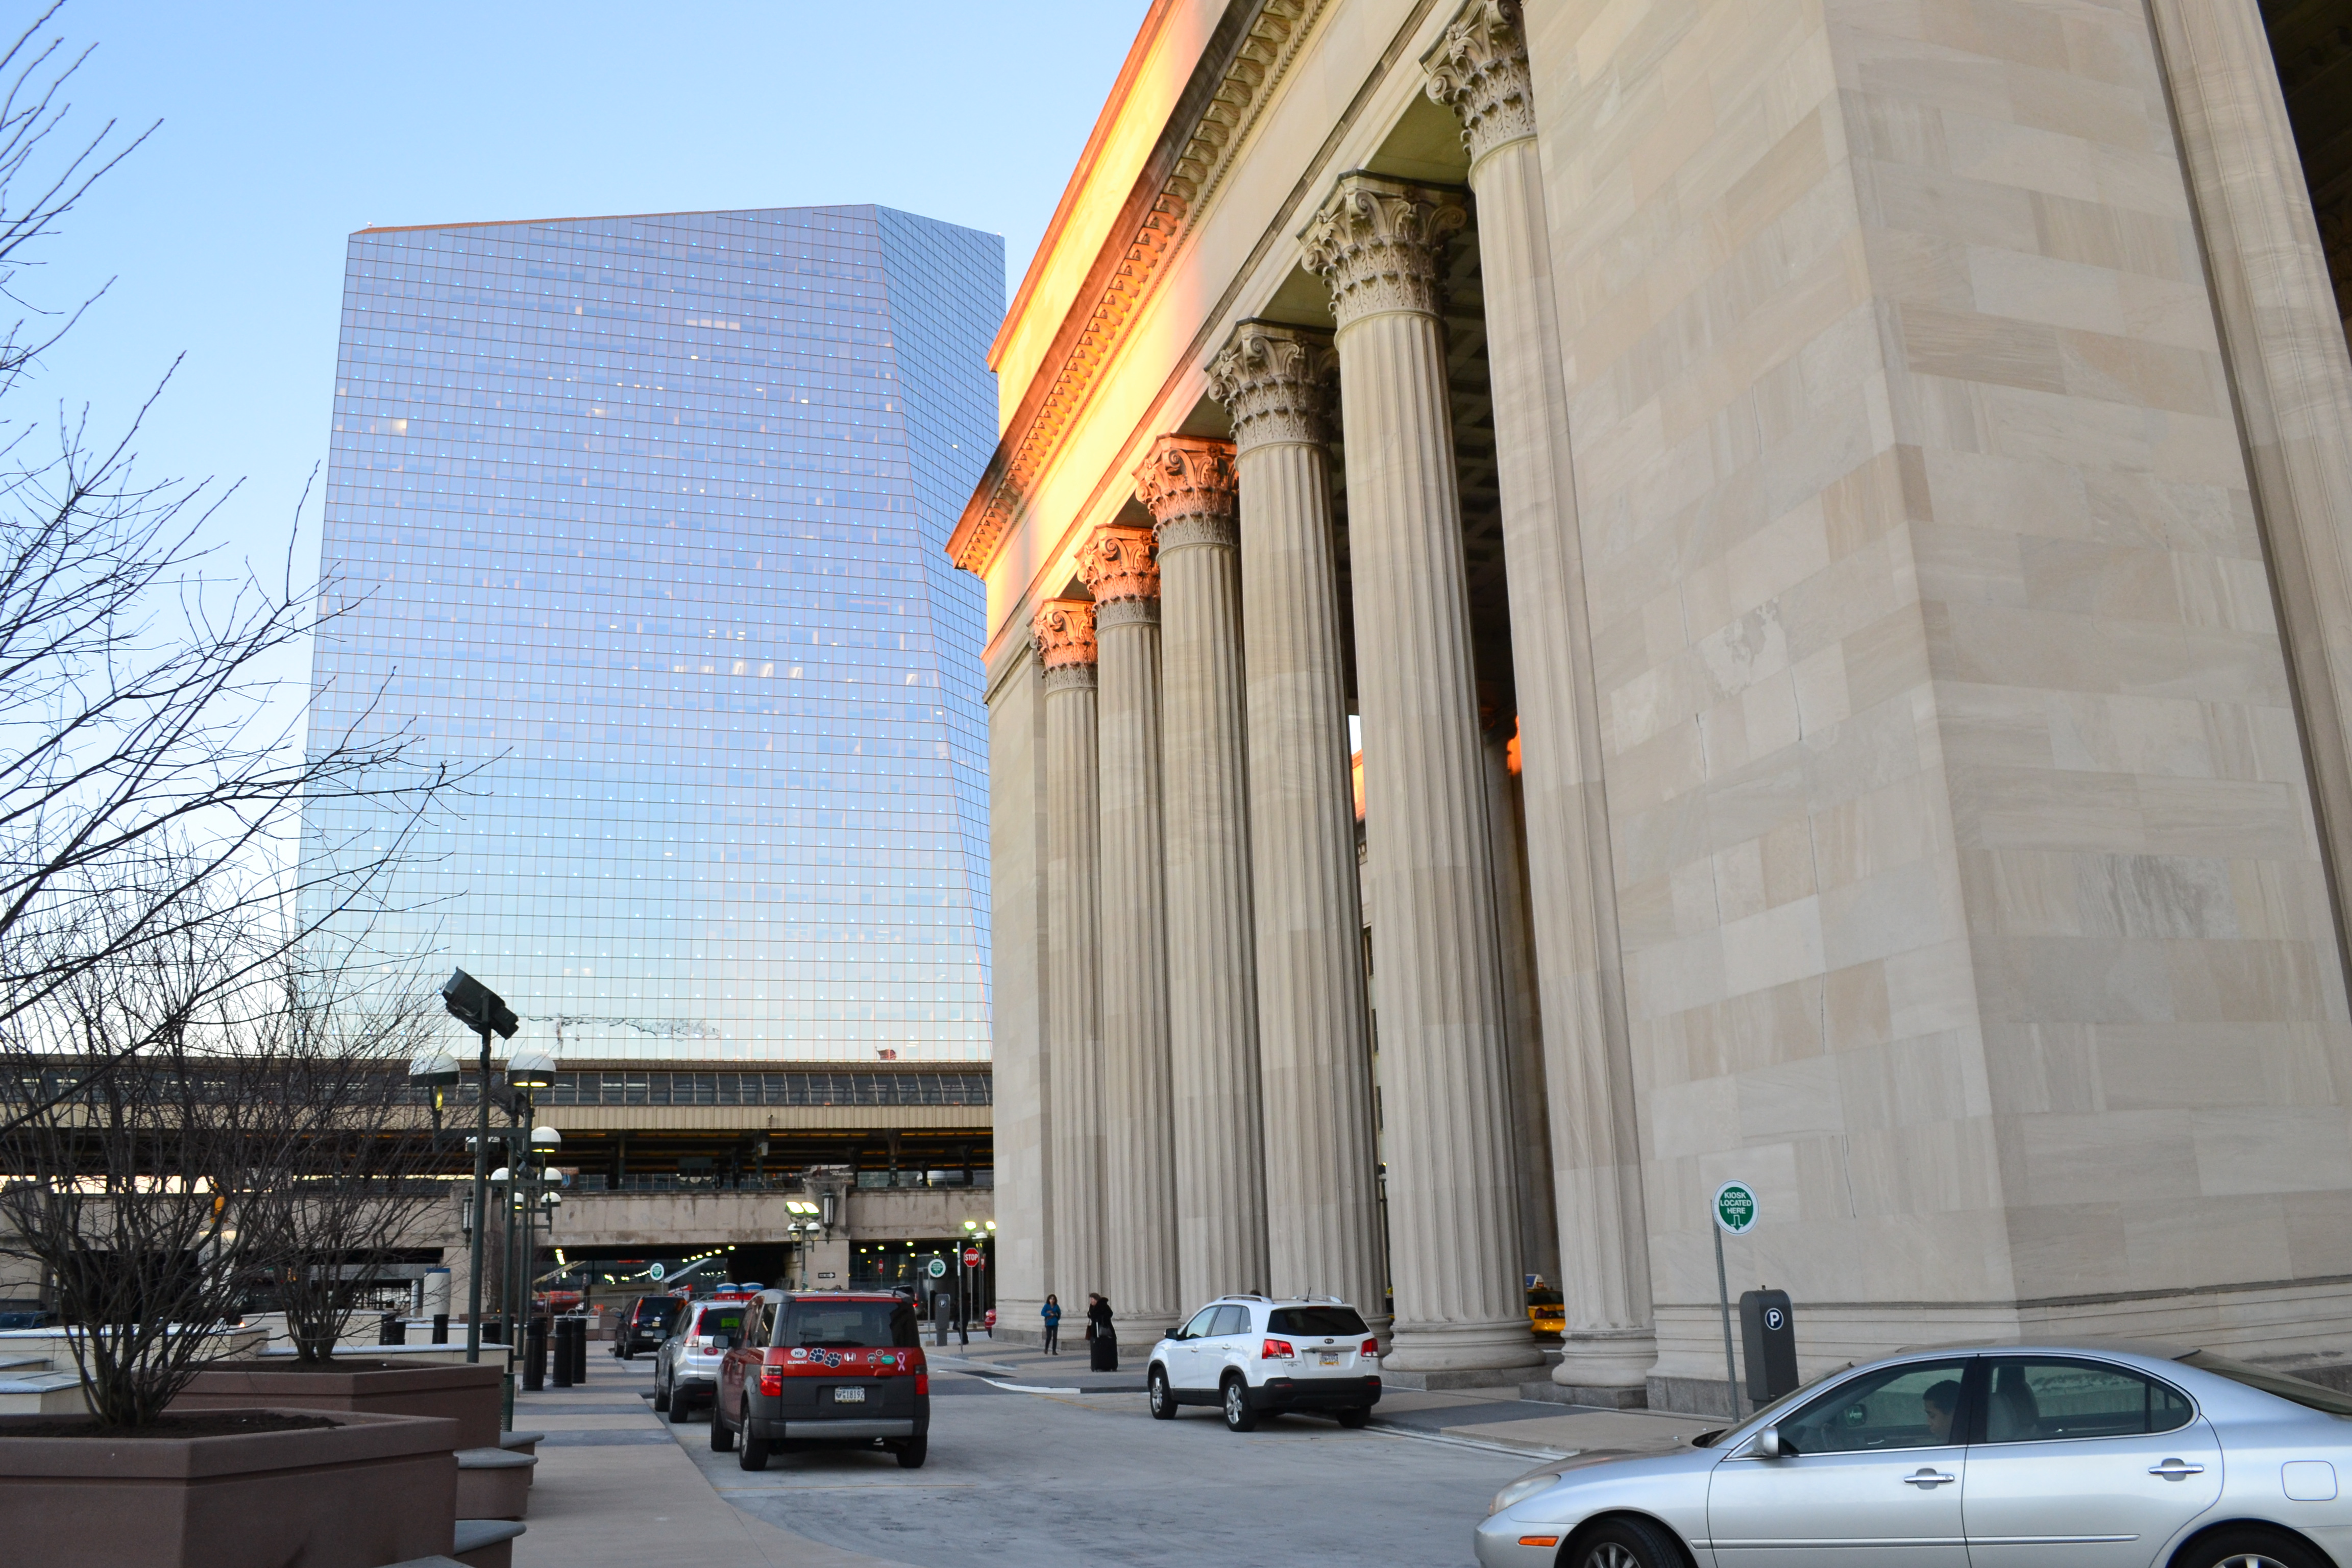 30th Street Station is Amtrak's third busiest station